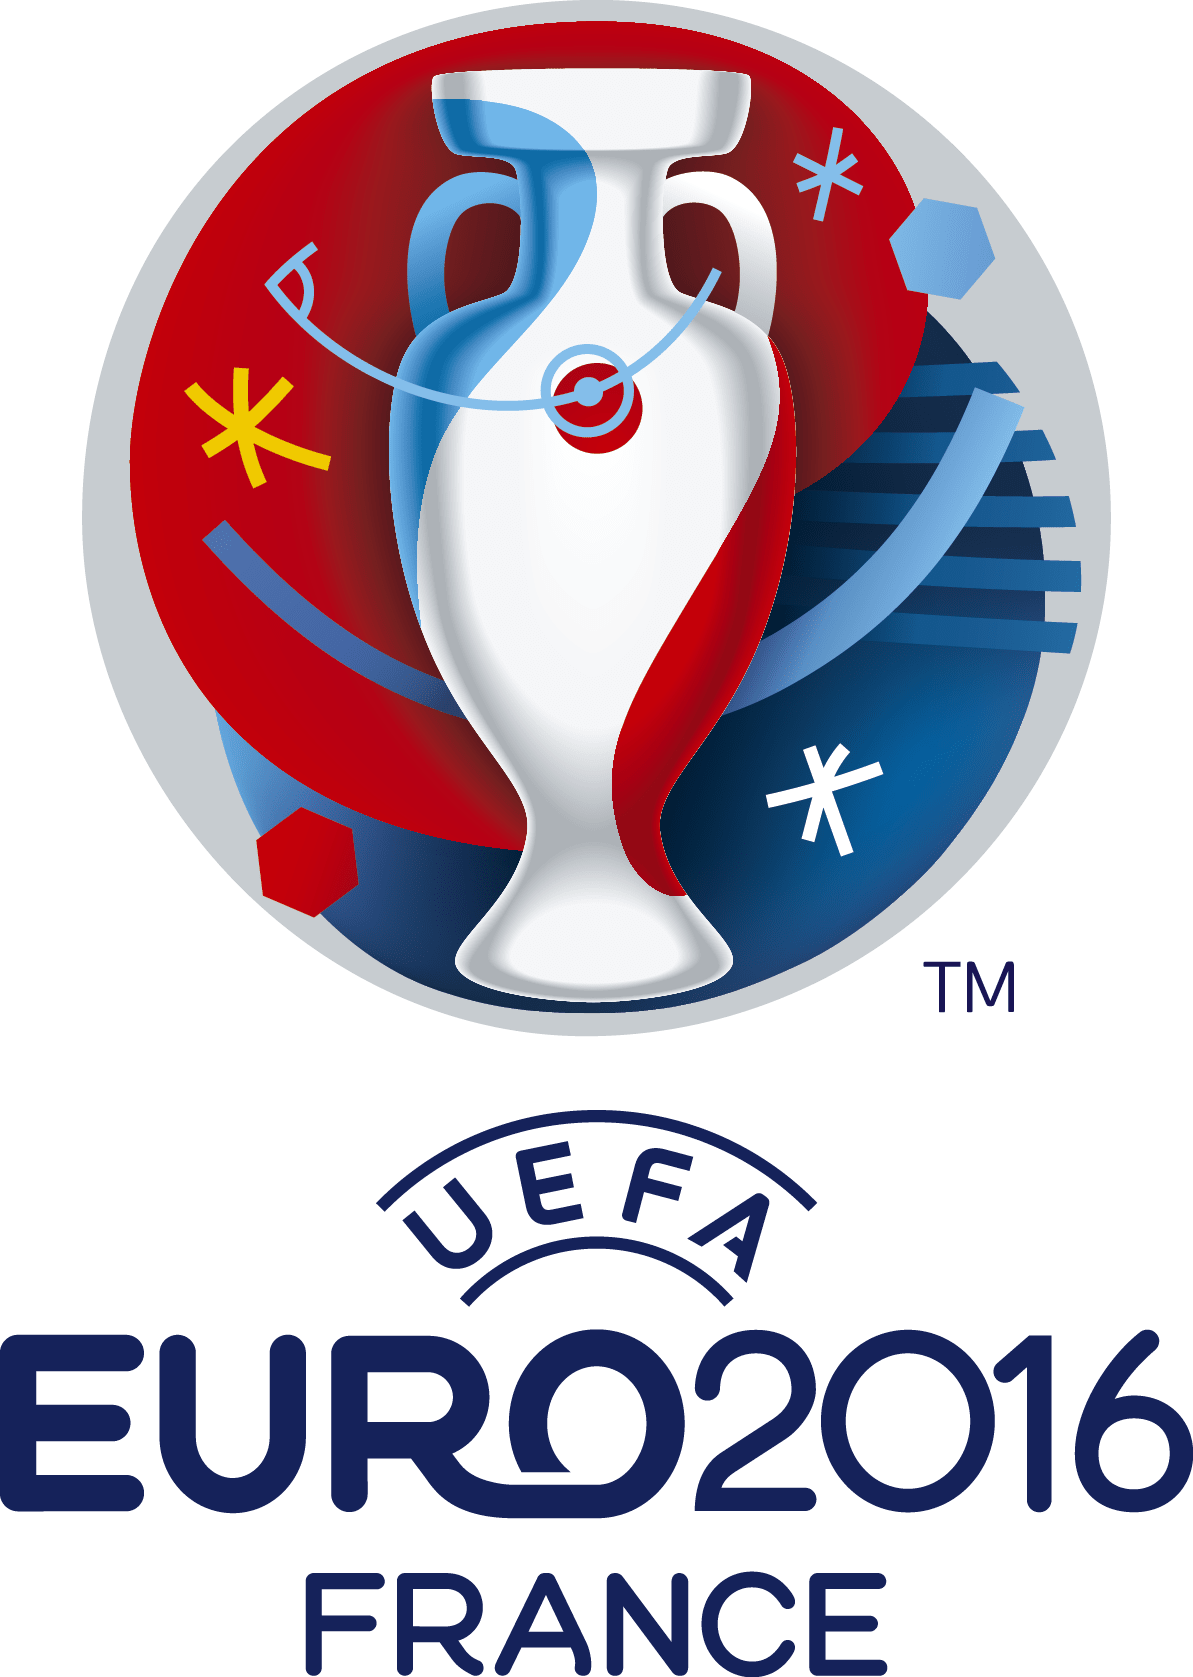 References - European soccer cup 2016 logo